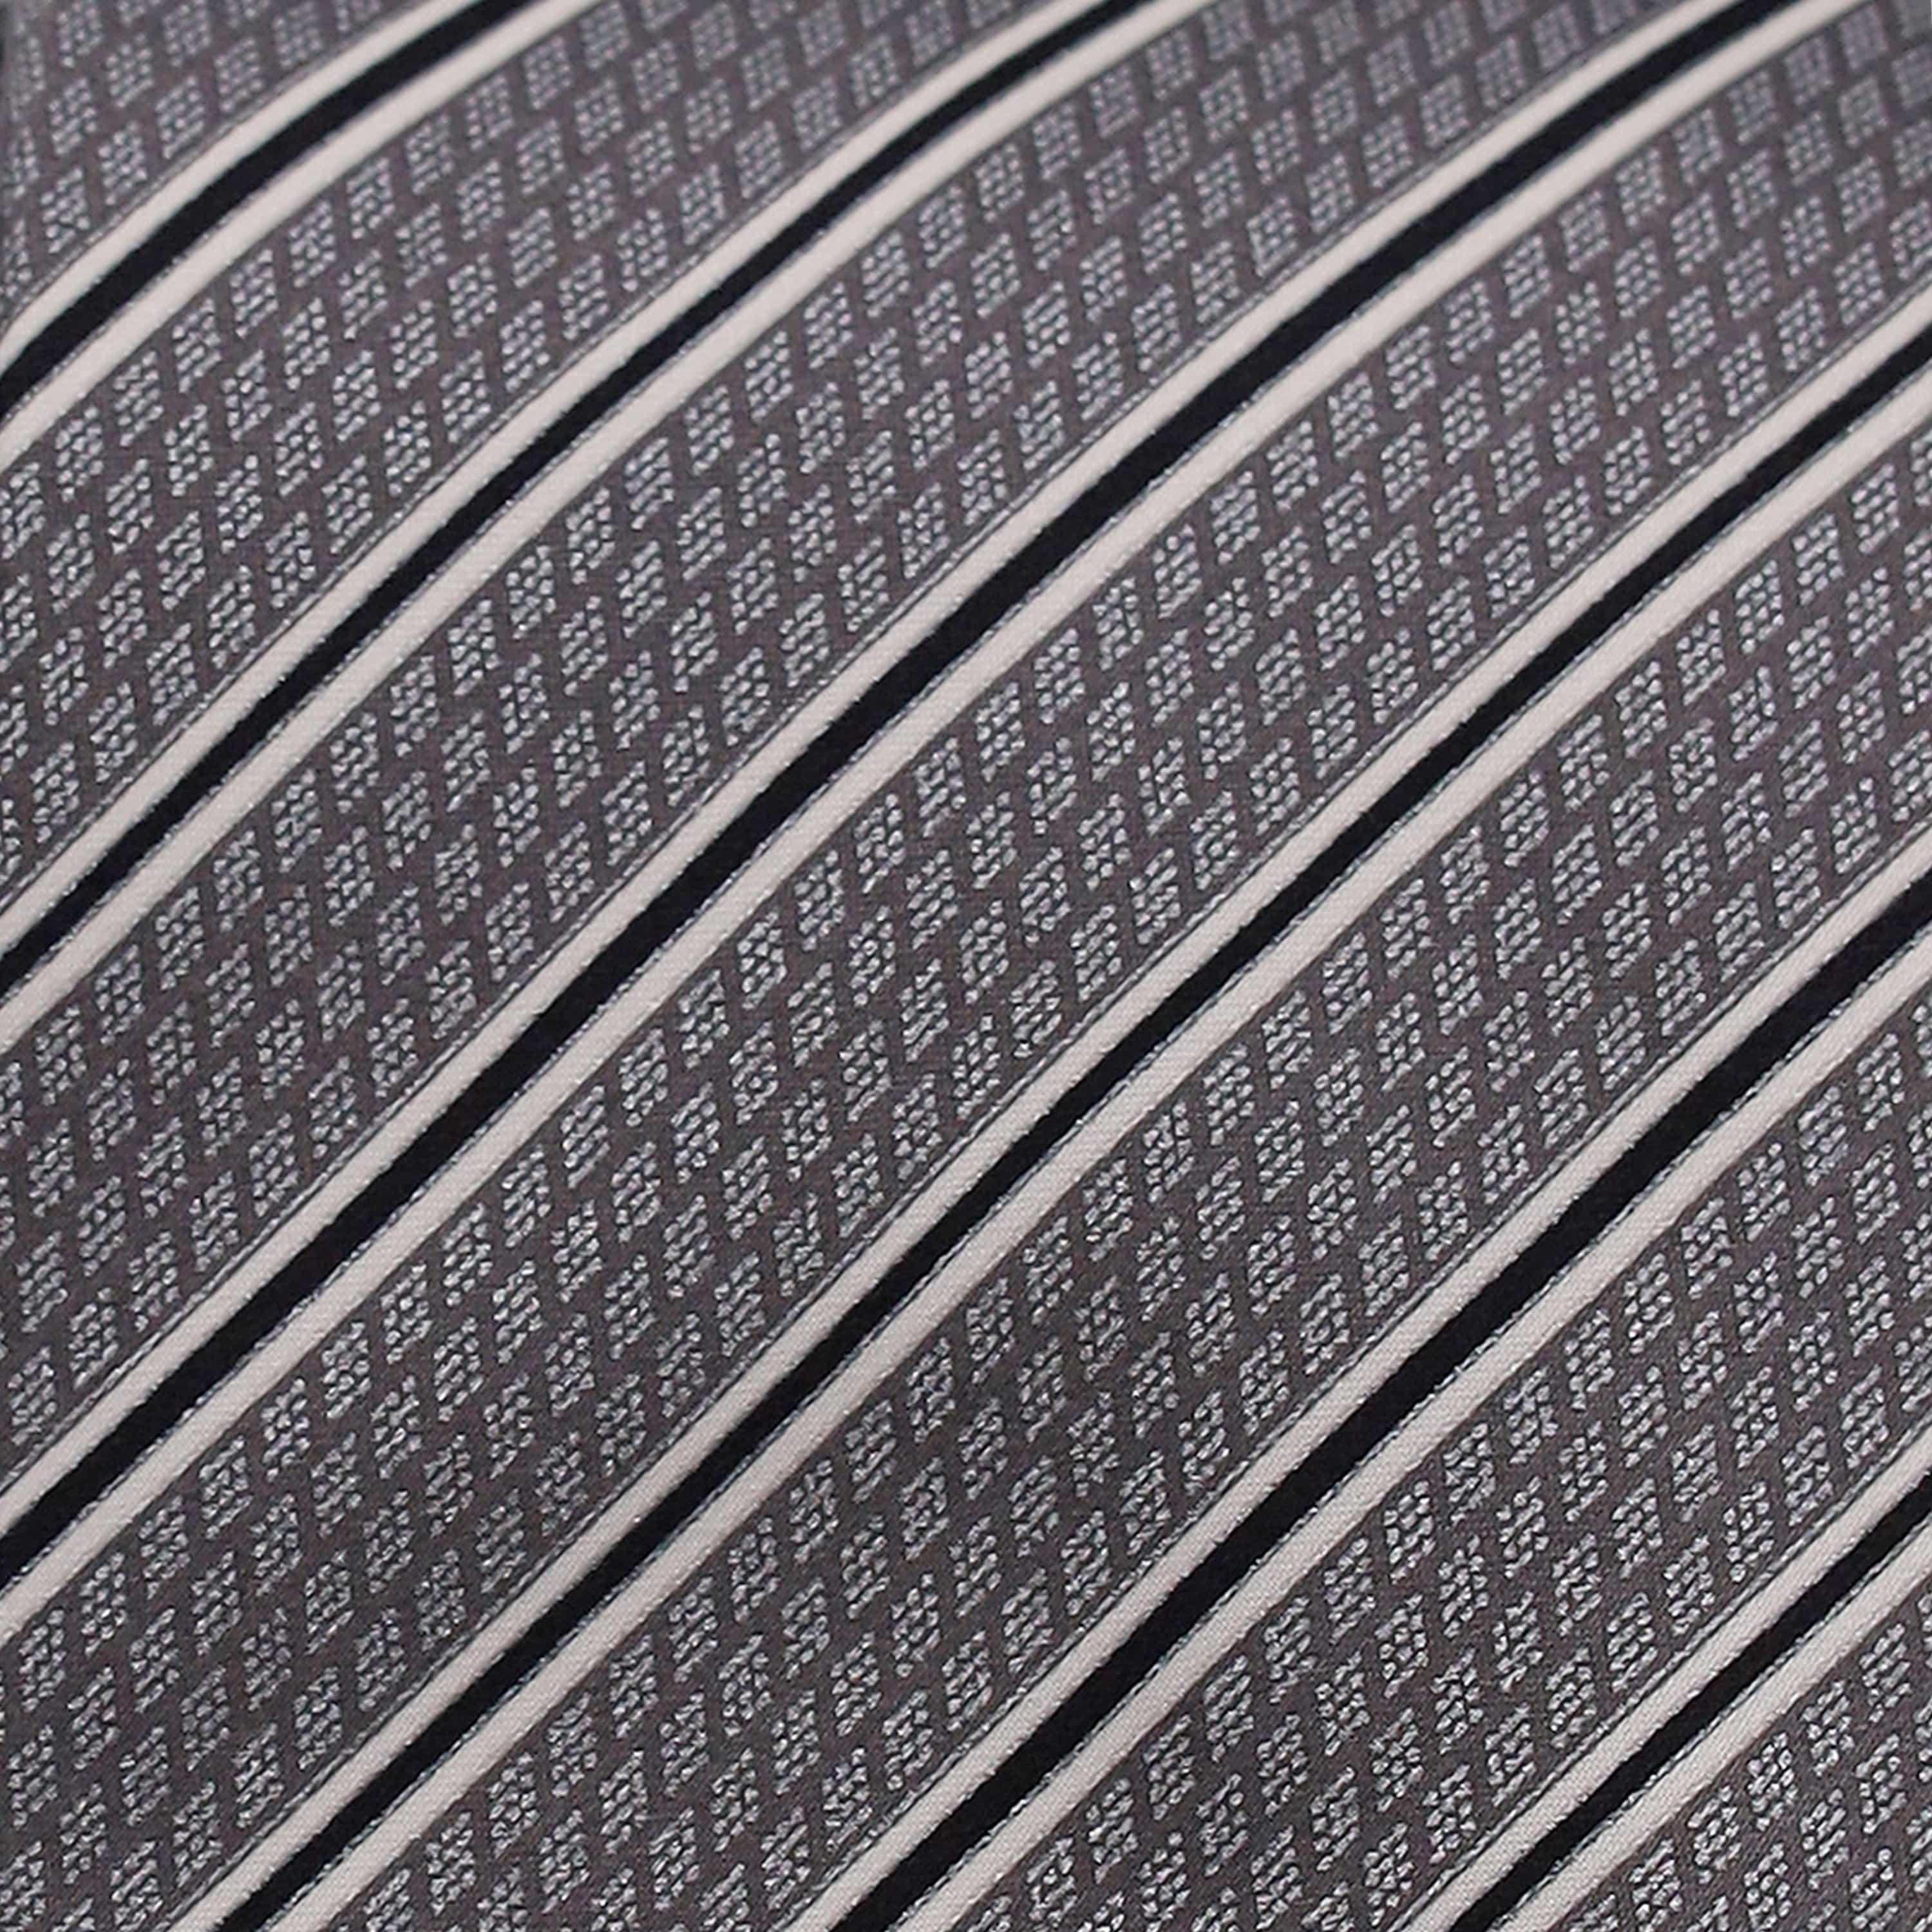 SILVER GREY AND BLACK STRIPE ON CHARCOAL GREY SILK TIE - Just White Shirts